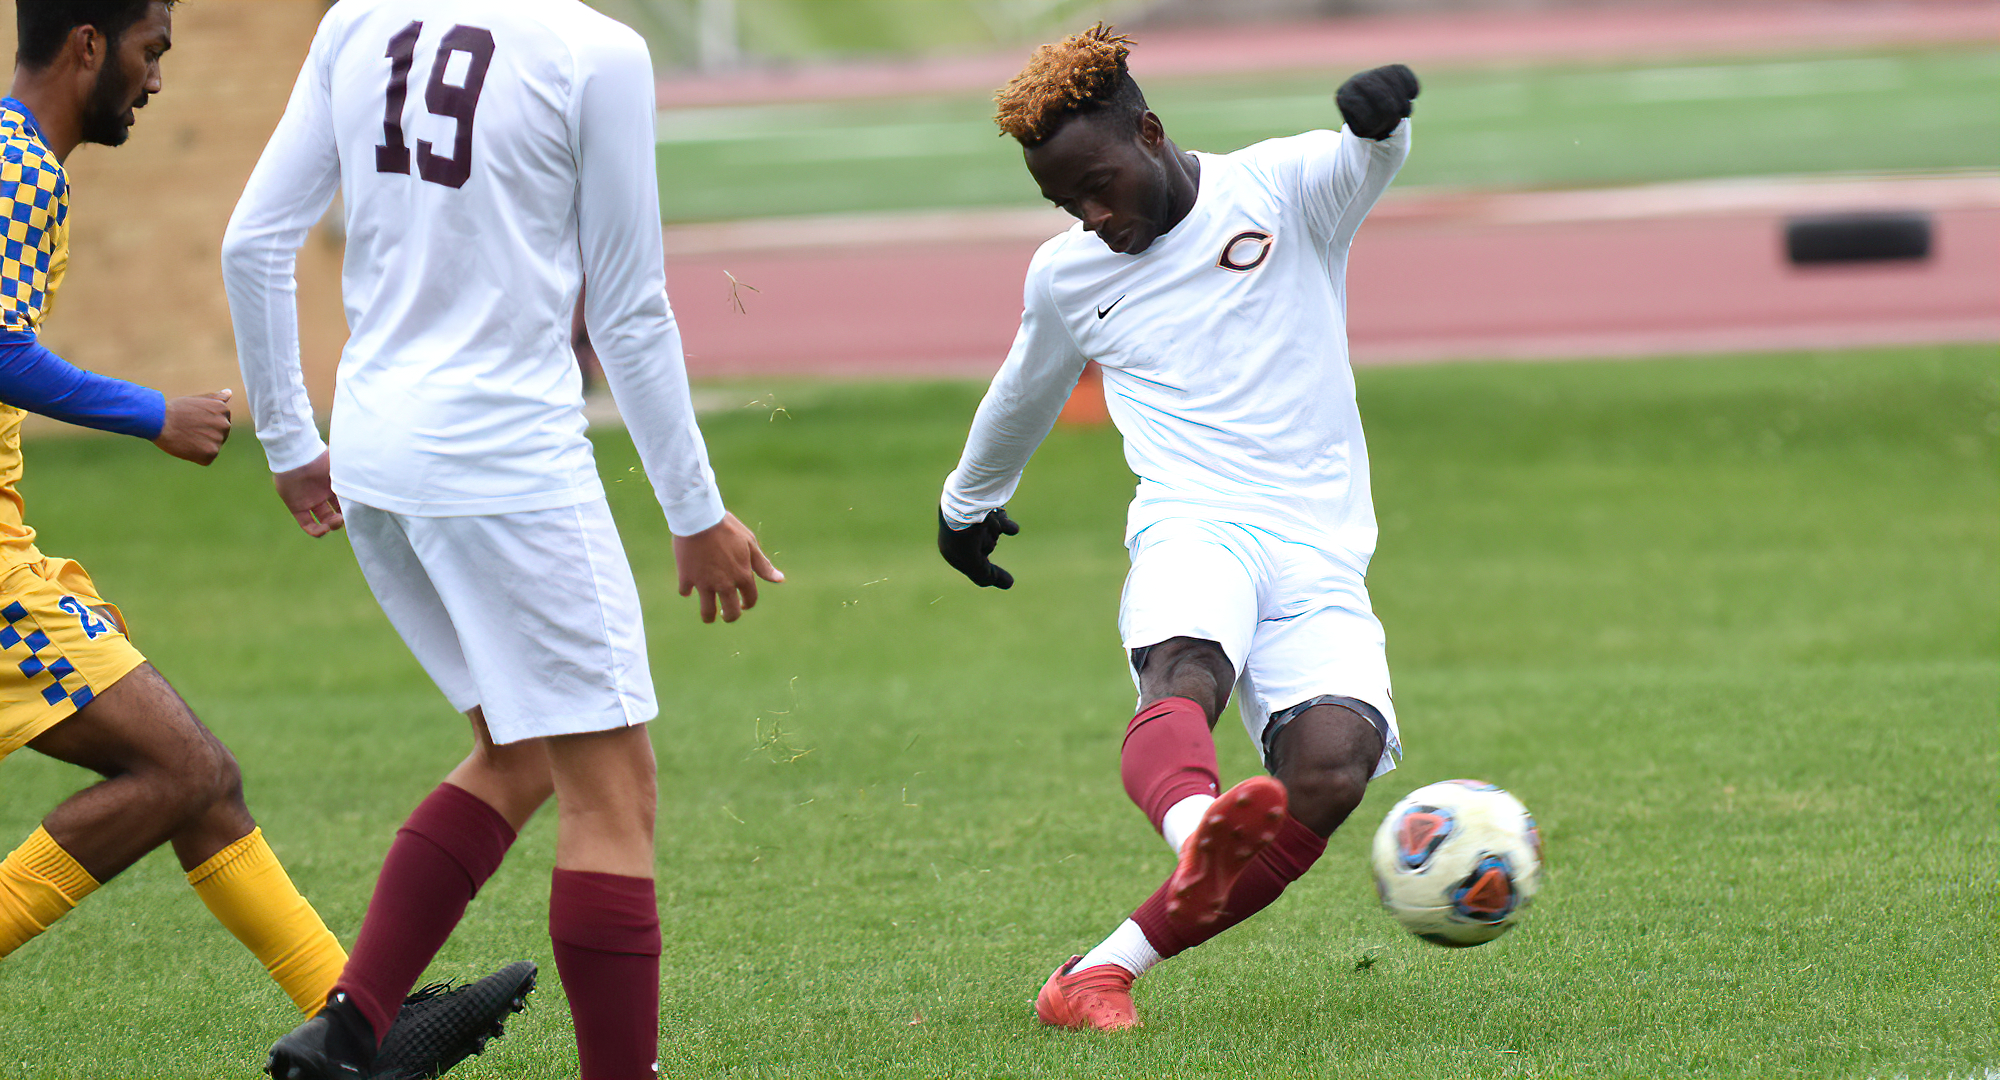 Telvin Vah scored two goals in a span of six minutes in the second half to help the Cobbers to a 3-1 win over Wis.-Superior.